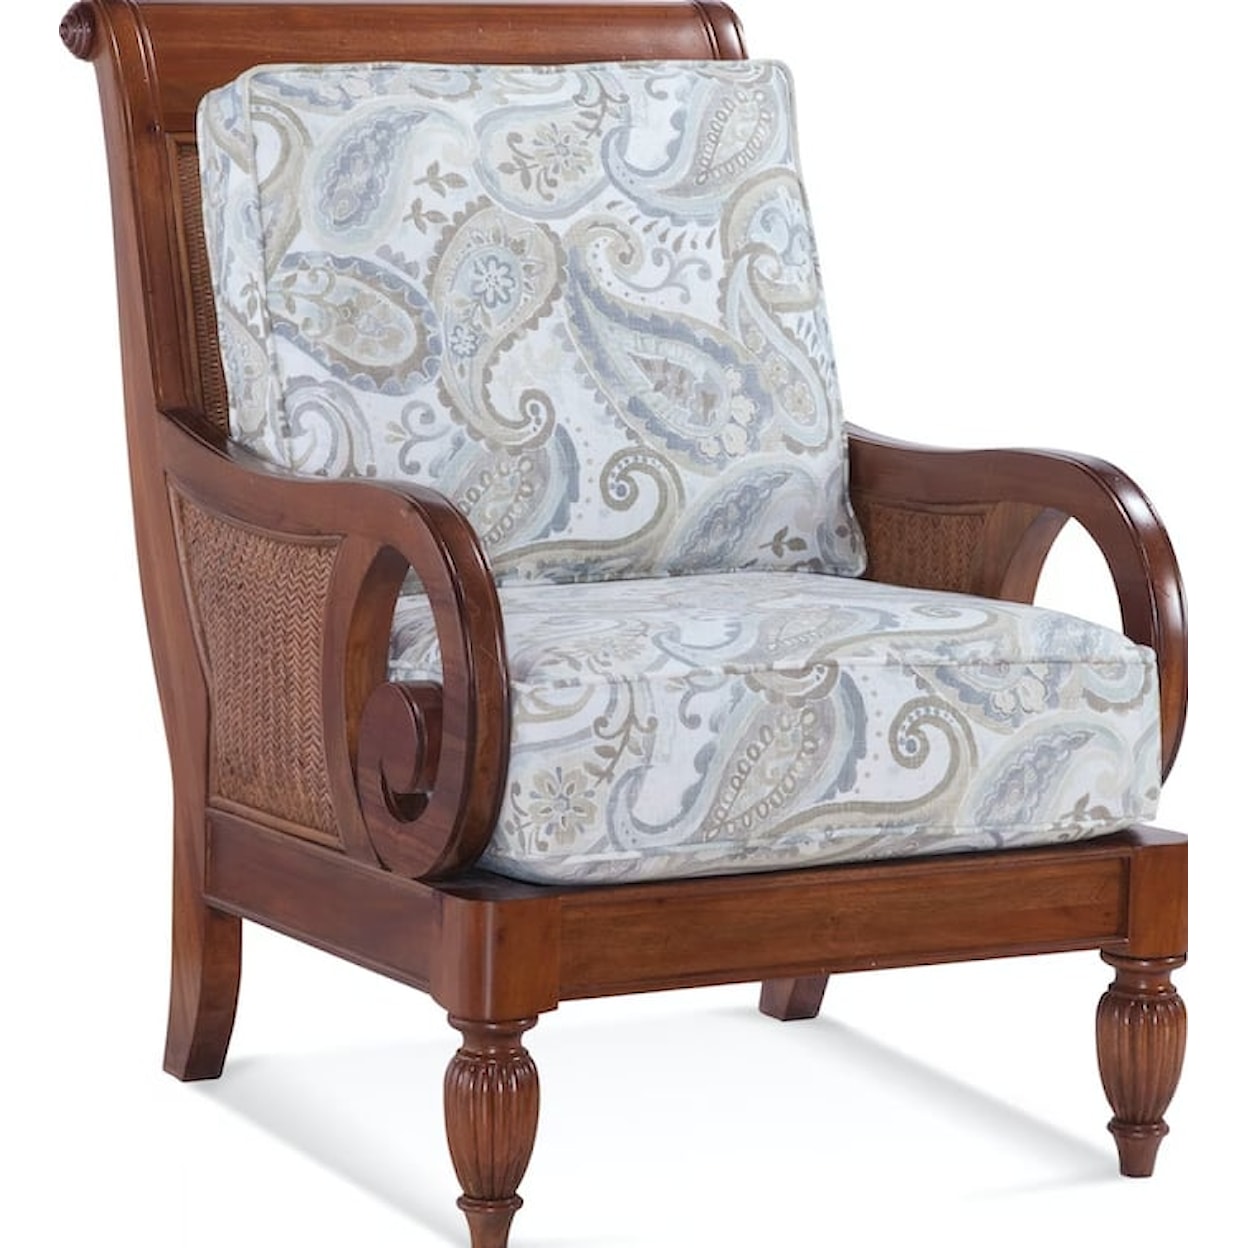 Braxton Culler Grand View Exposed Wood Chair